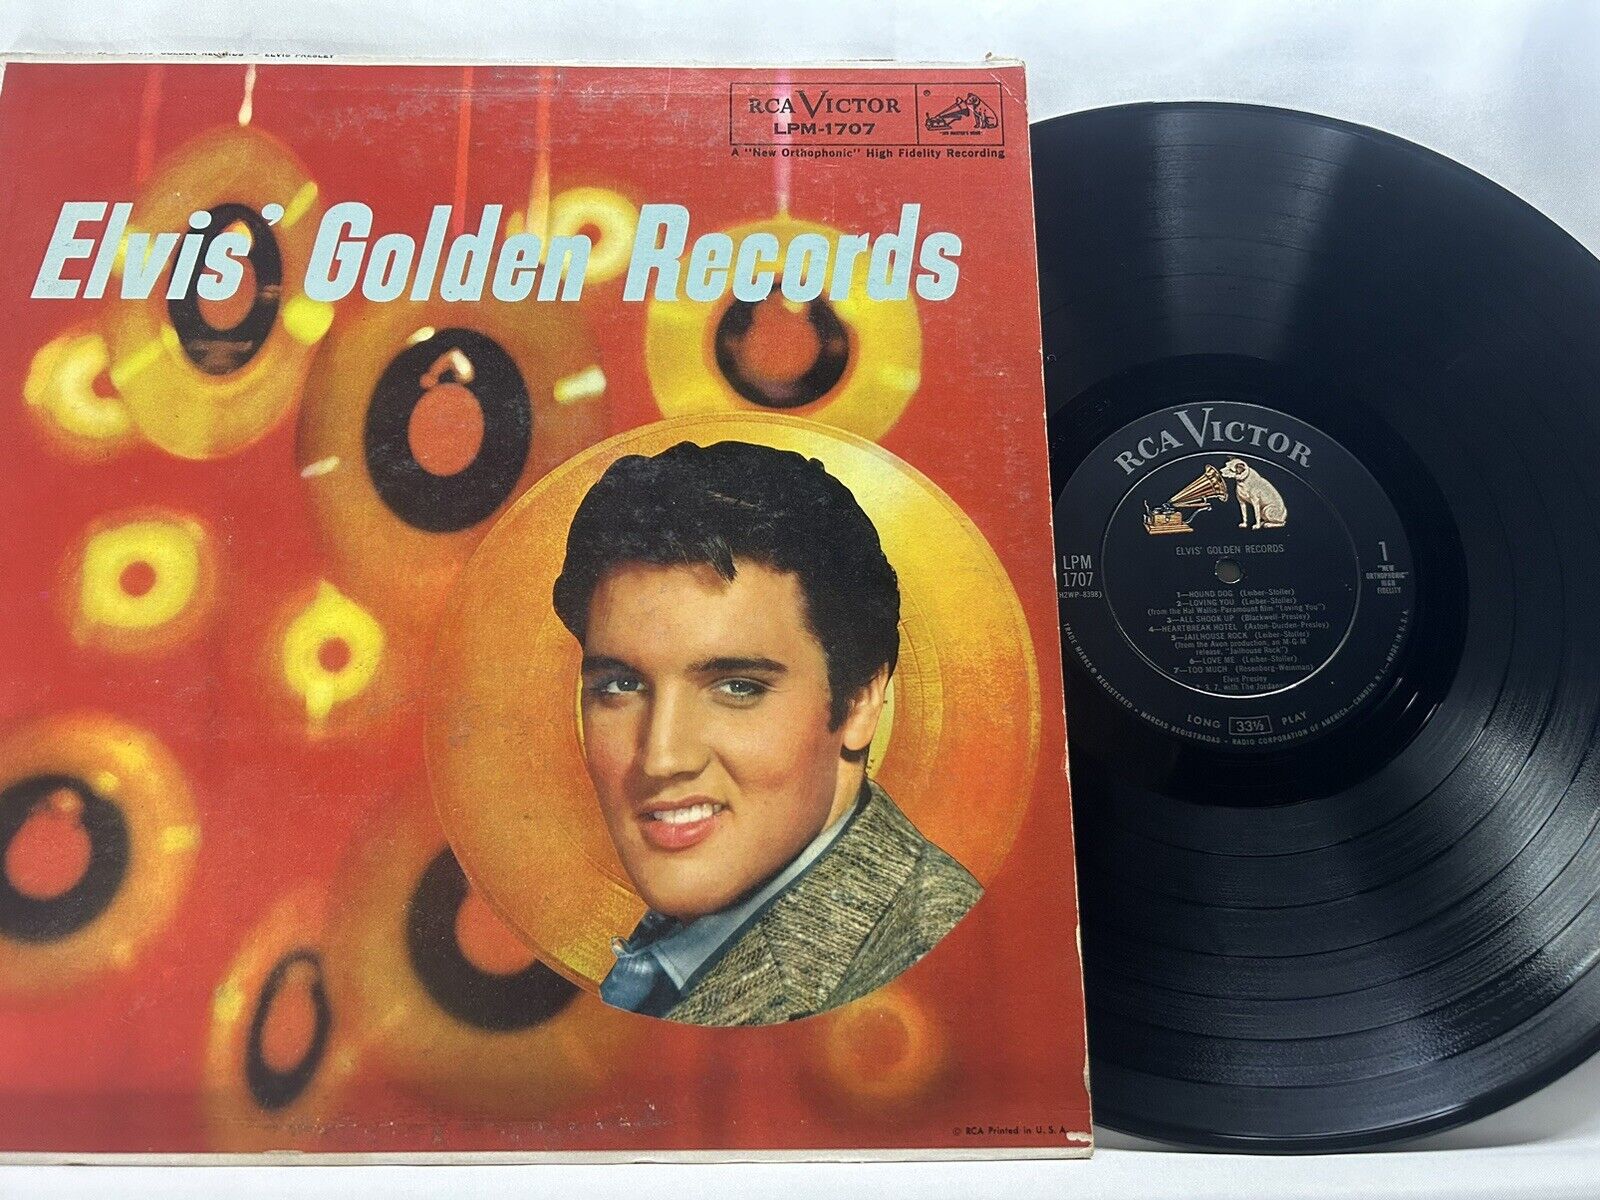 Elvis' Golden Records LPM 1707 Long Play Mono RCA Victor Black Label Tested EX